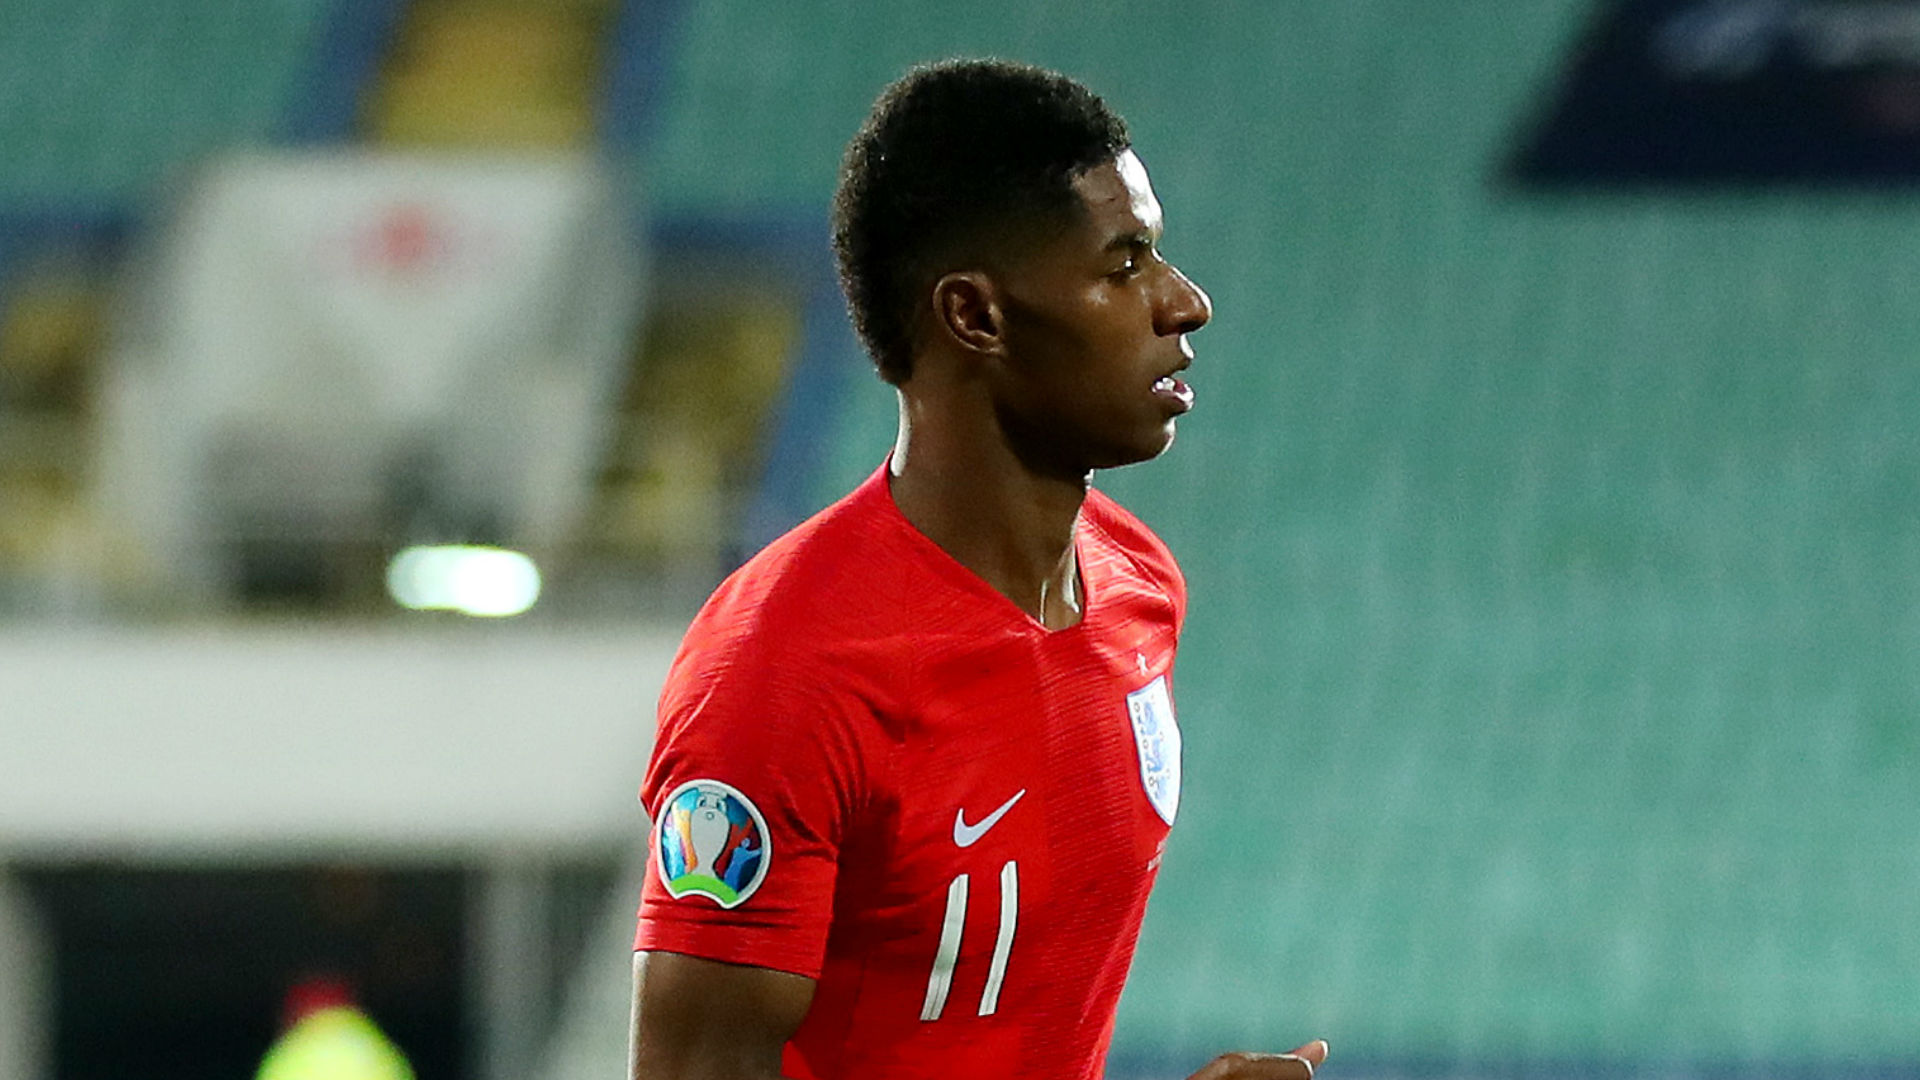 Rashford thanks Bulgaria captain Popov for showing 'courage' by responding to racist chants